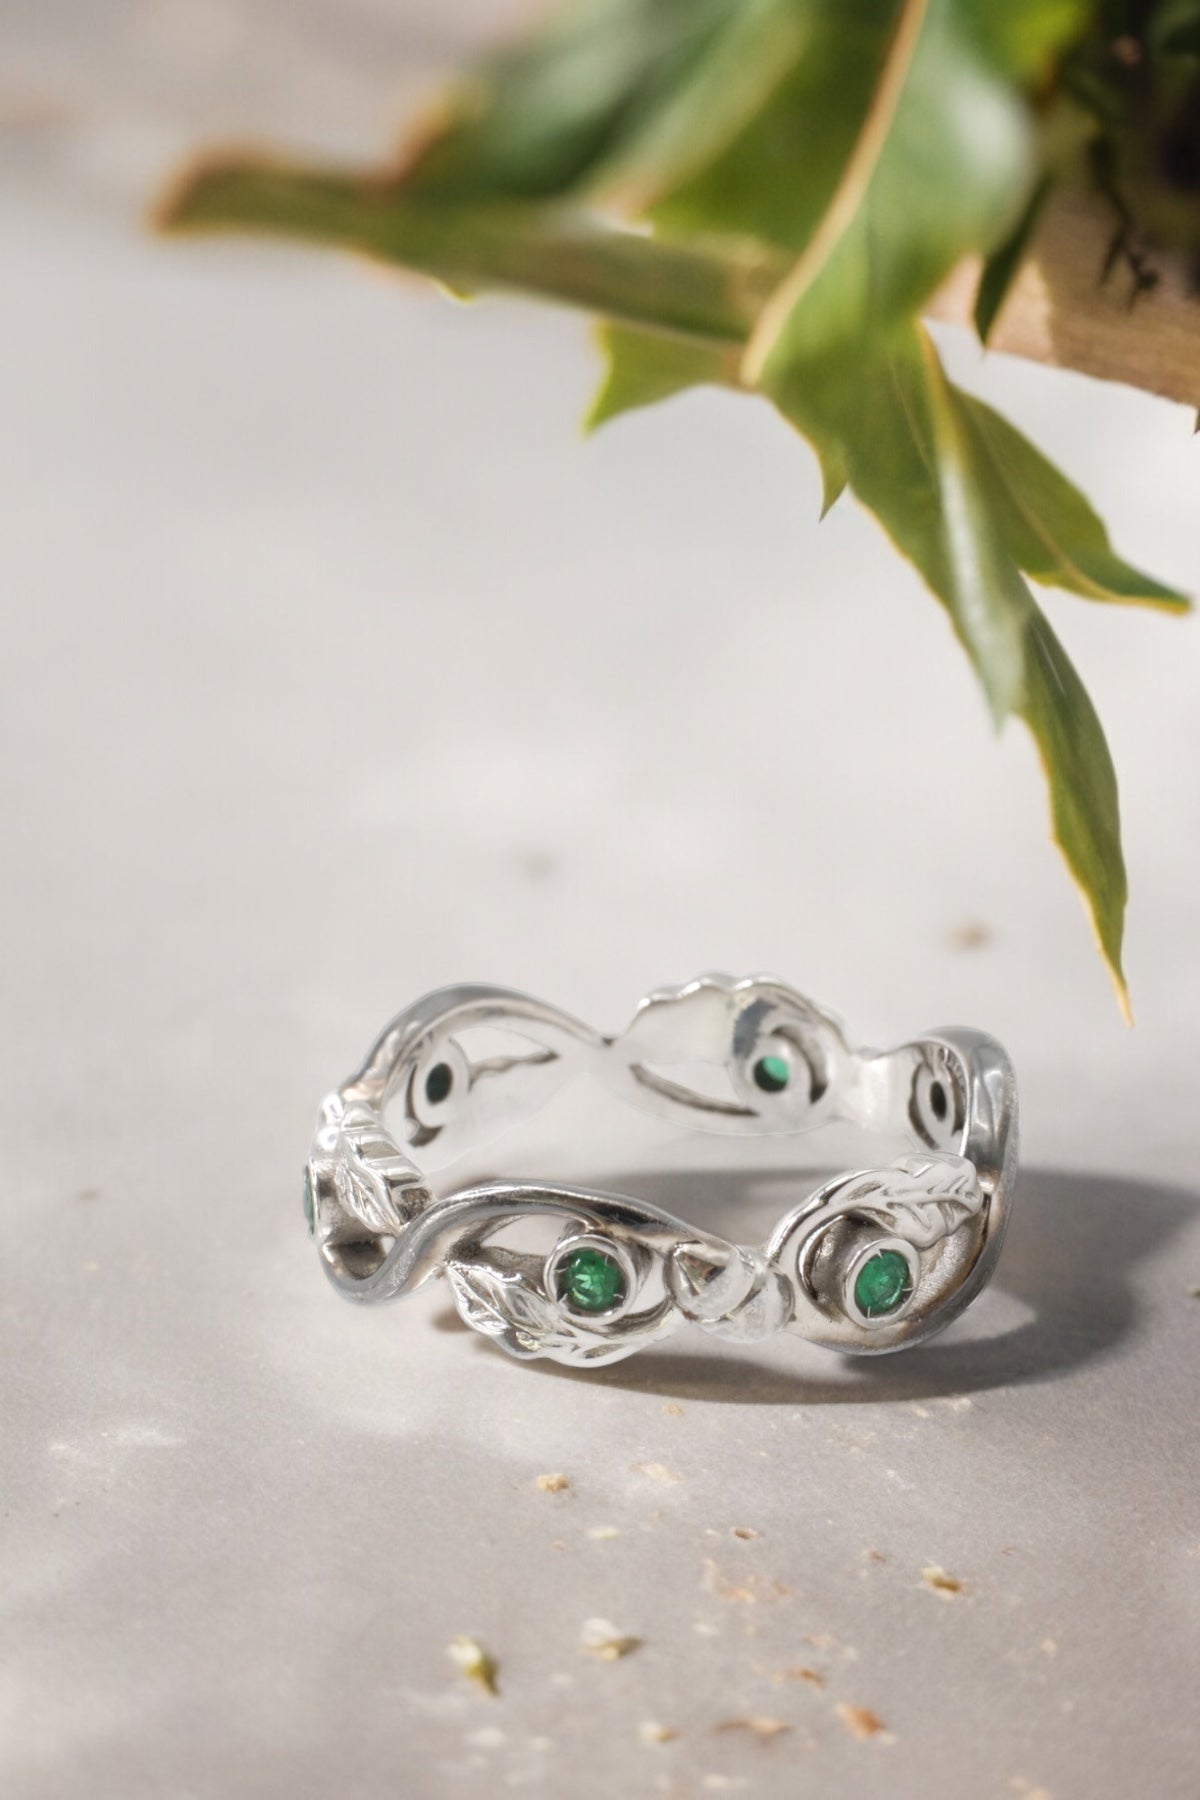 READY TO SHIP: Emerald oak leaves unisex wedding band in 14K white gold with black rhodium plating, AVAILABLE RING SIZES: 9 US - Eden Garden Jewelry™